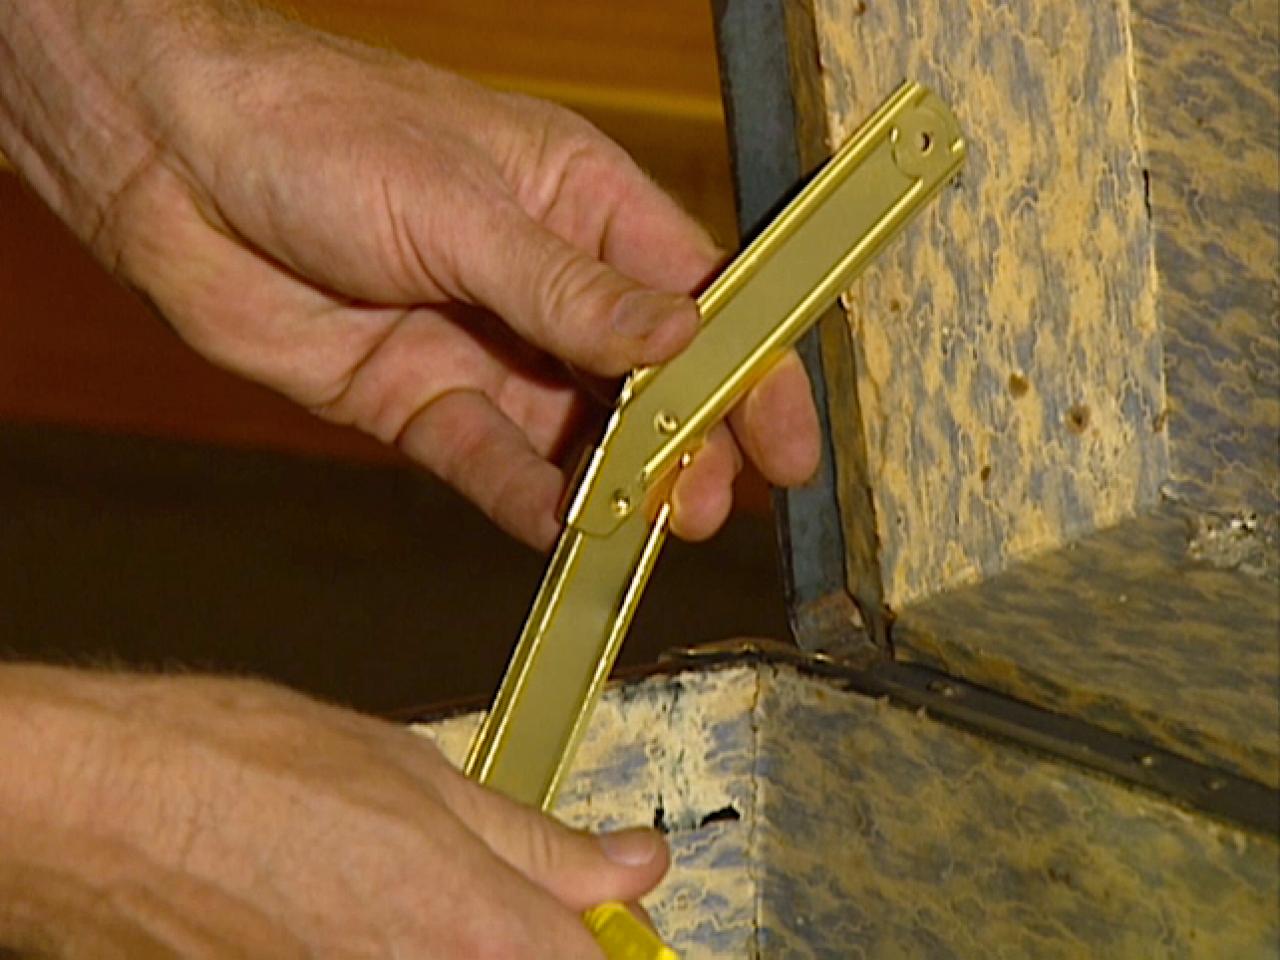 How To Repair An Old Trunk Tos Diy, Leather Handles For Steamer Trunk